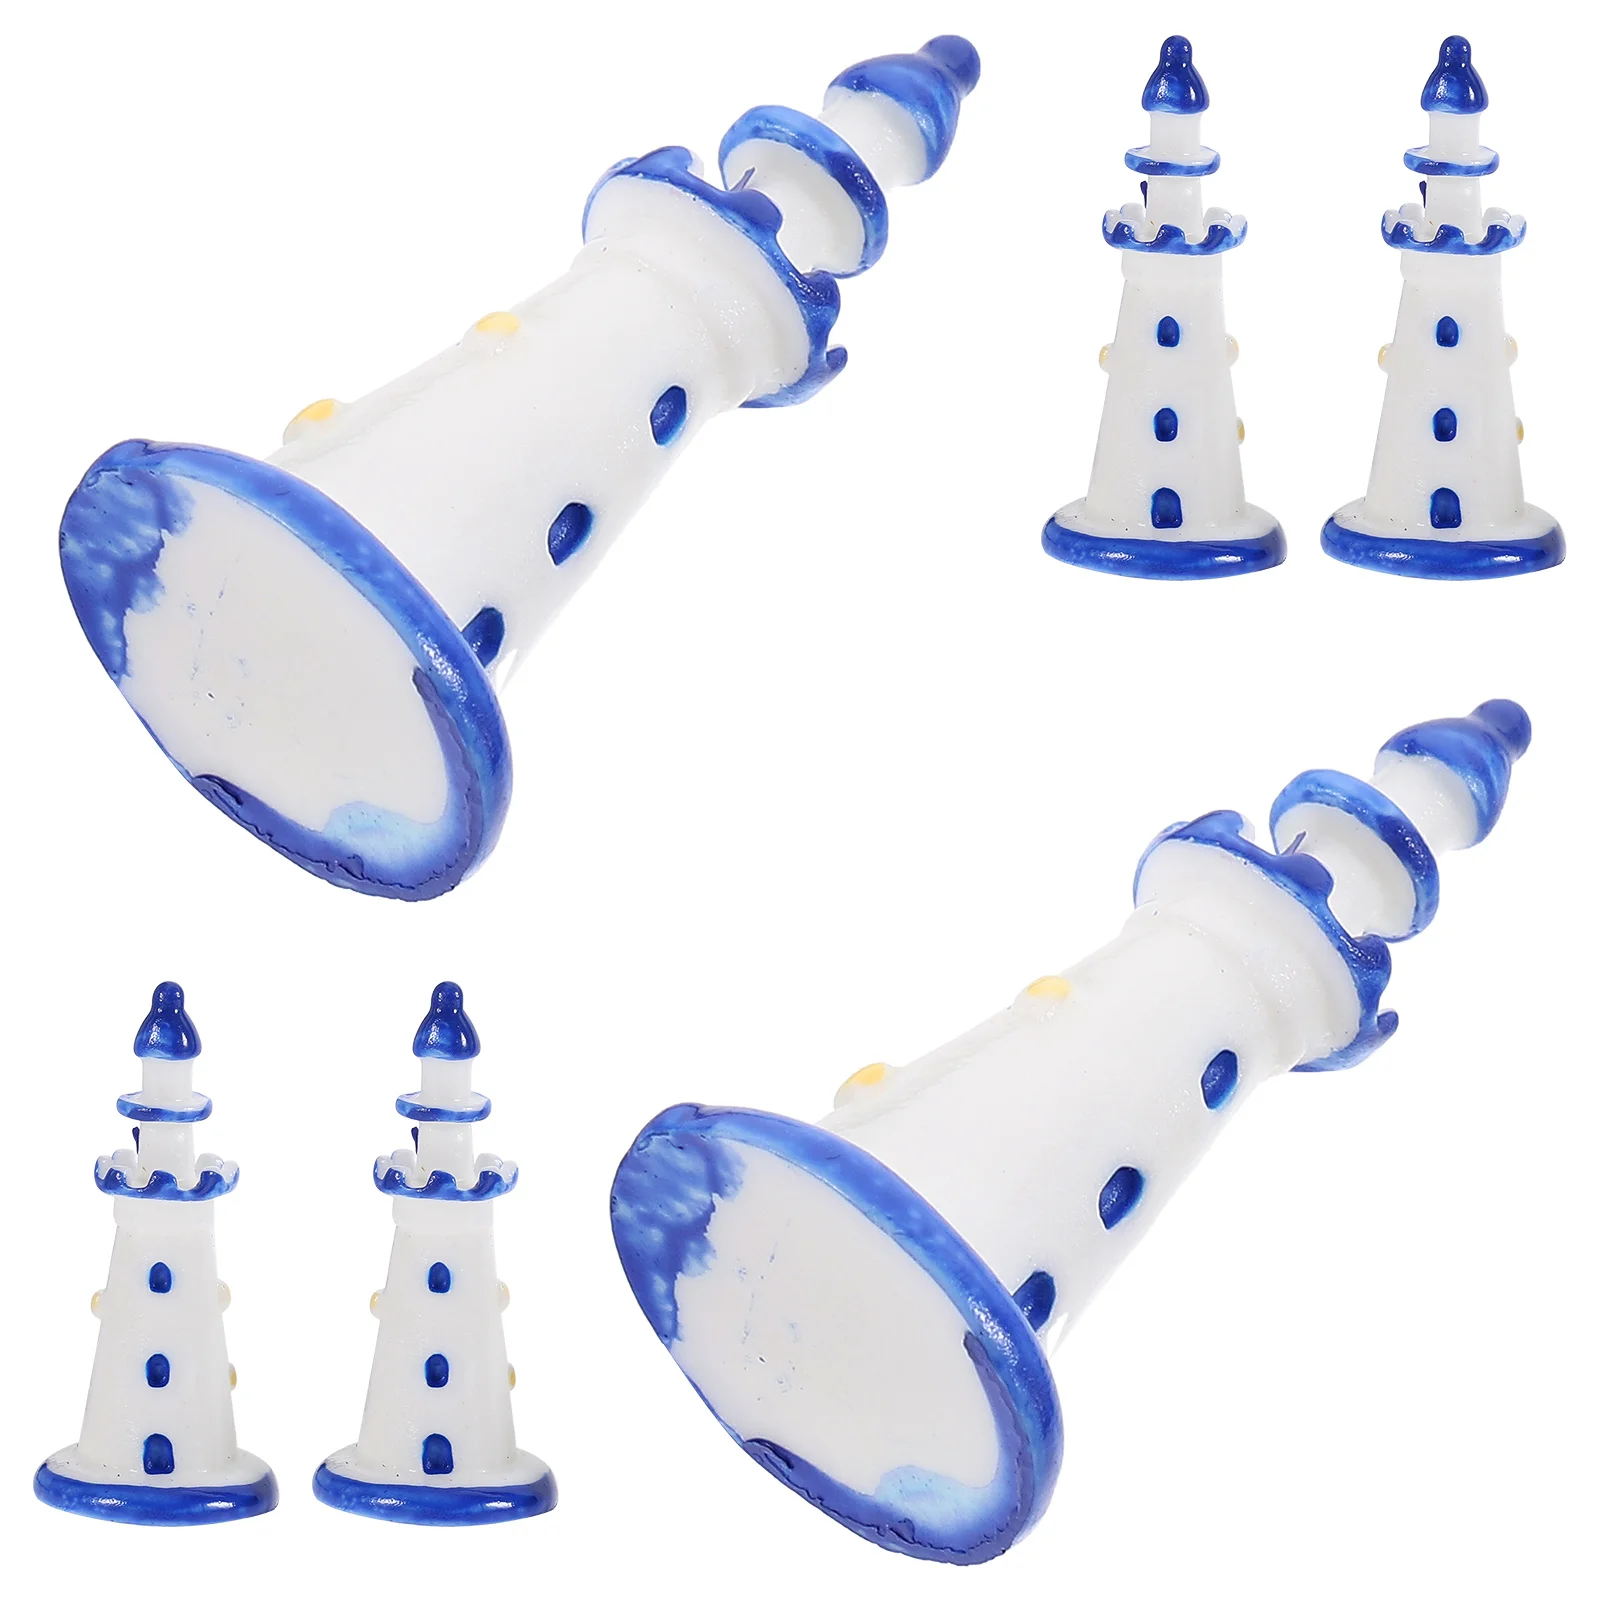 10 Pcs Household Mini Lighthouse Home Decor Scenery Decorations Resin Photography Props dvotinst newborn baby photography props chef theme set cooking rattan mat vegetables decorations costume studio photo props